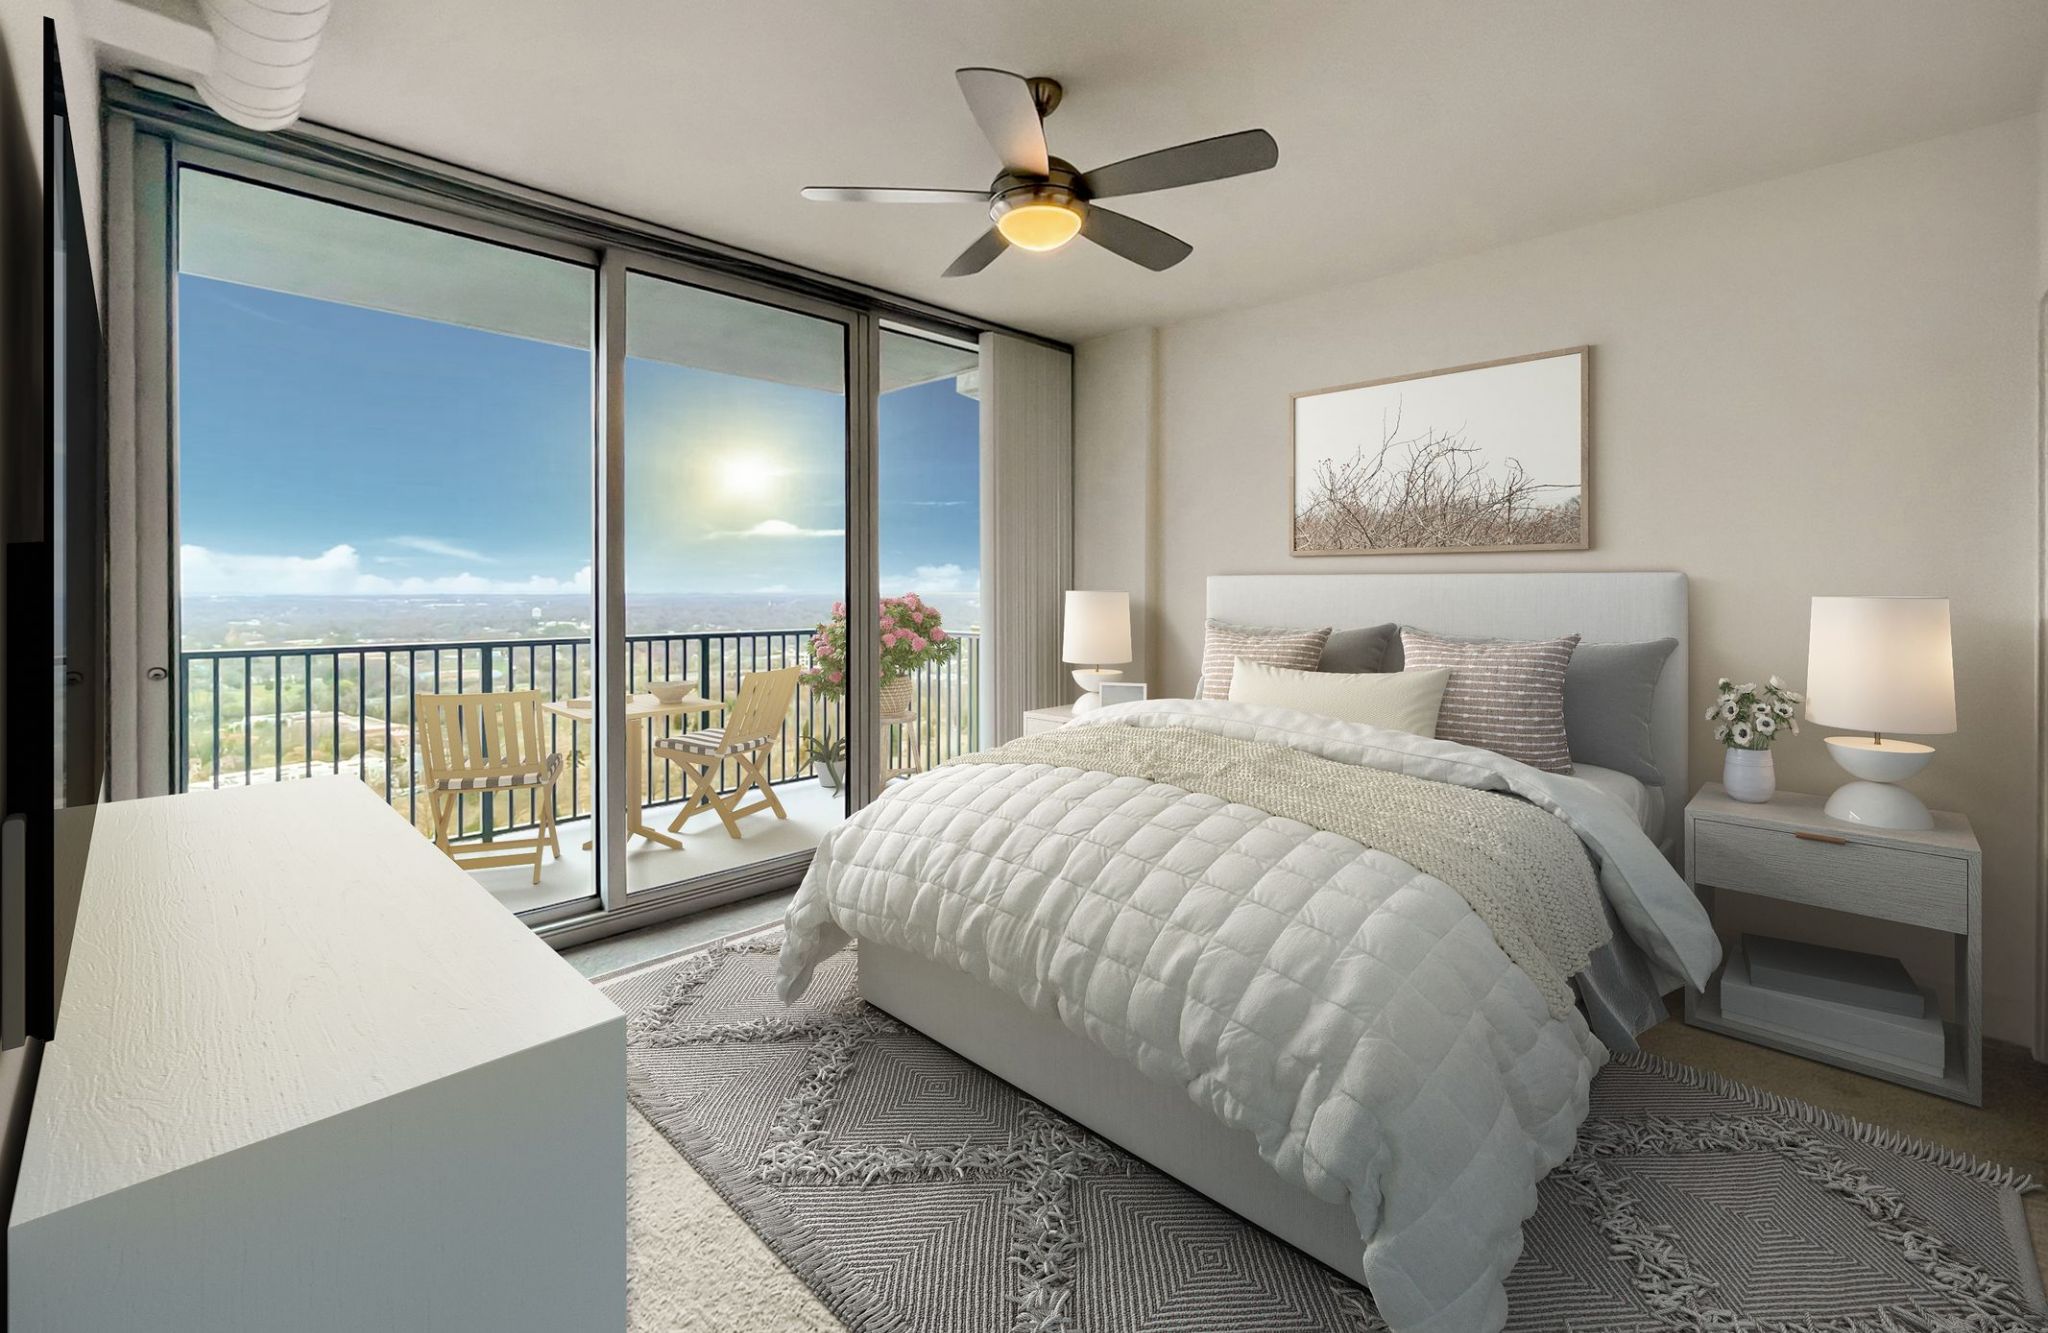 The Vue Charlotte apartment bedroom with ceiling fan, floor-to-ceiling windows with view of the city